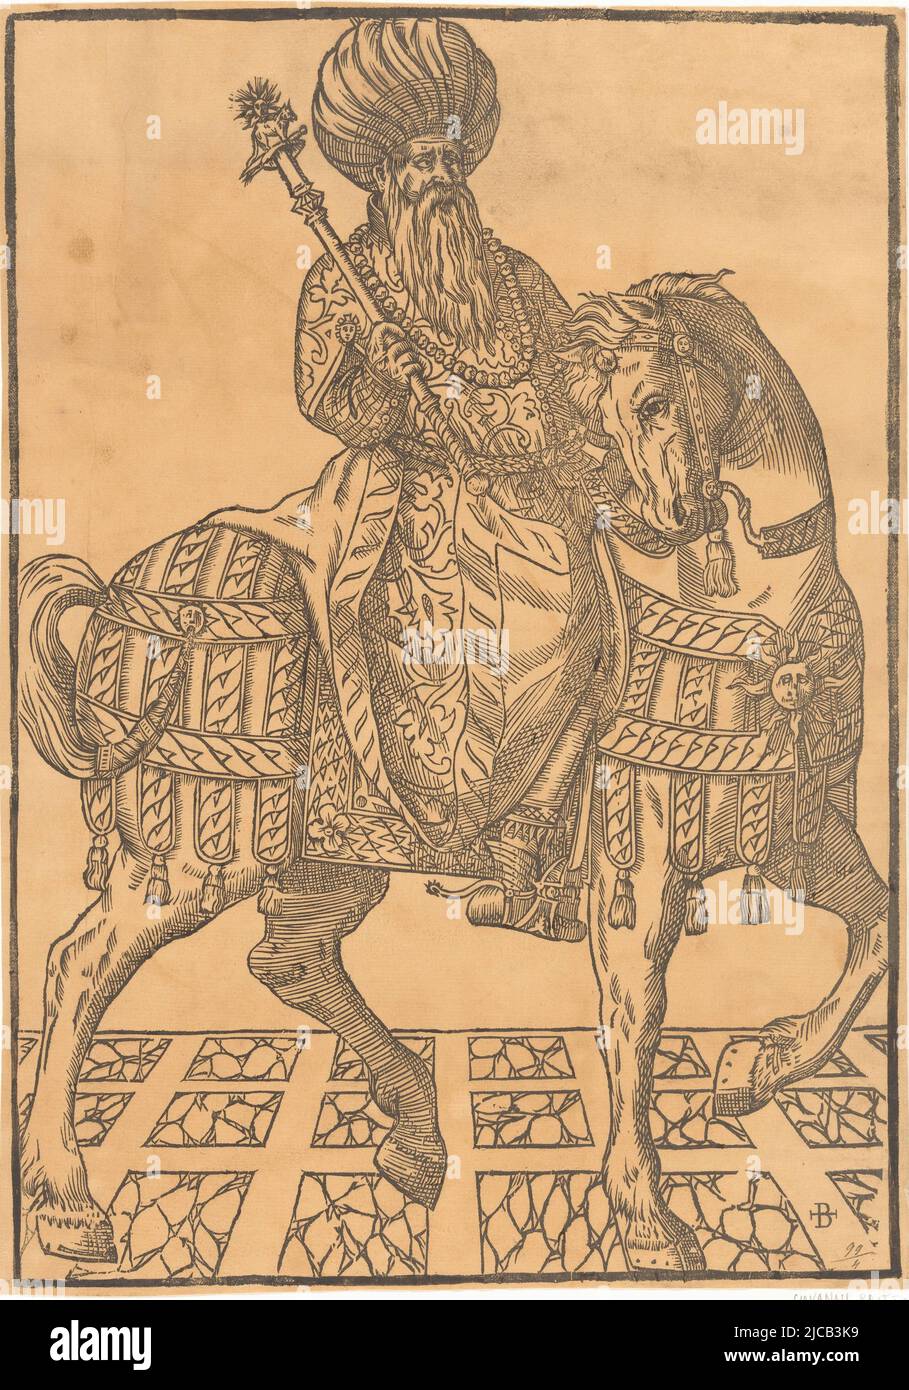 A bearded man with a turban and a staff, sitting on a horse, Man with turban on horseback, print maker: Giovanni Britto, (mentioned on object), Italy, c. 1510 - after 1550, paper, h 391 mm × w 277 mm Stock Photo